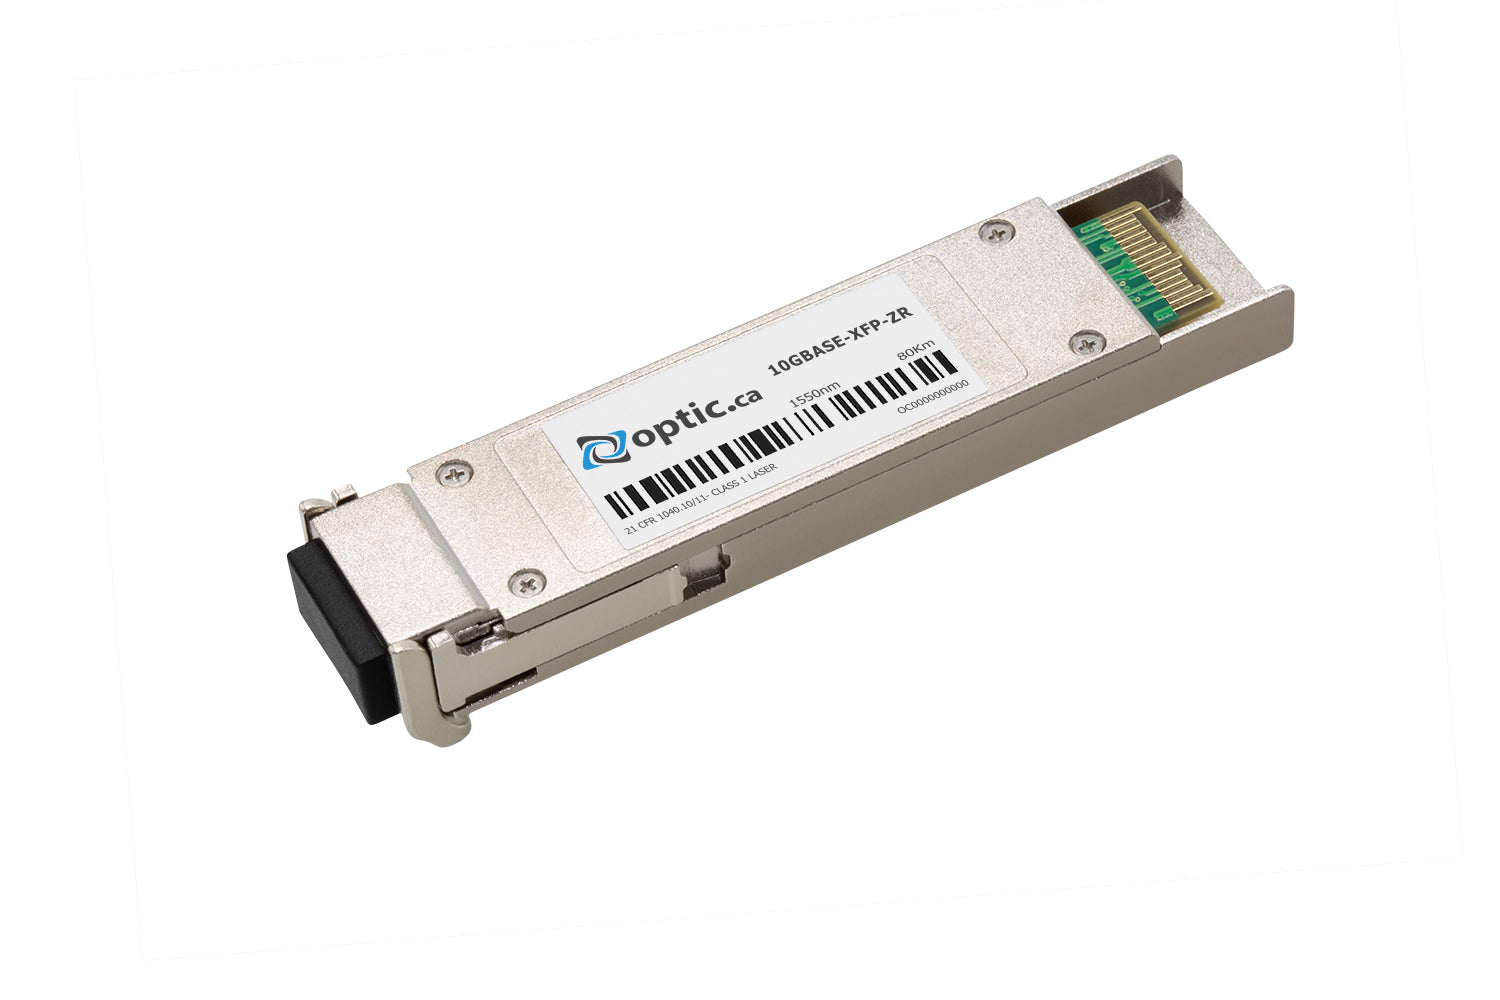 OPTIC.CA - 10GBASE-ZR XFP - JD107A-OC - HPE COMPATIBLE